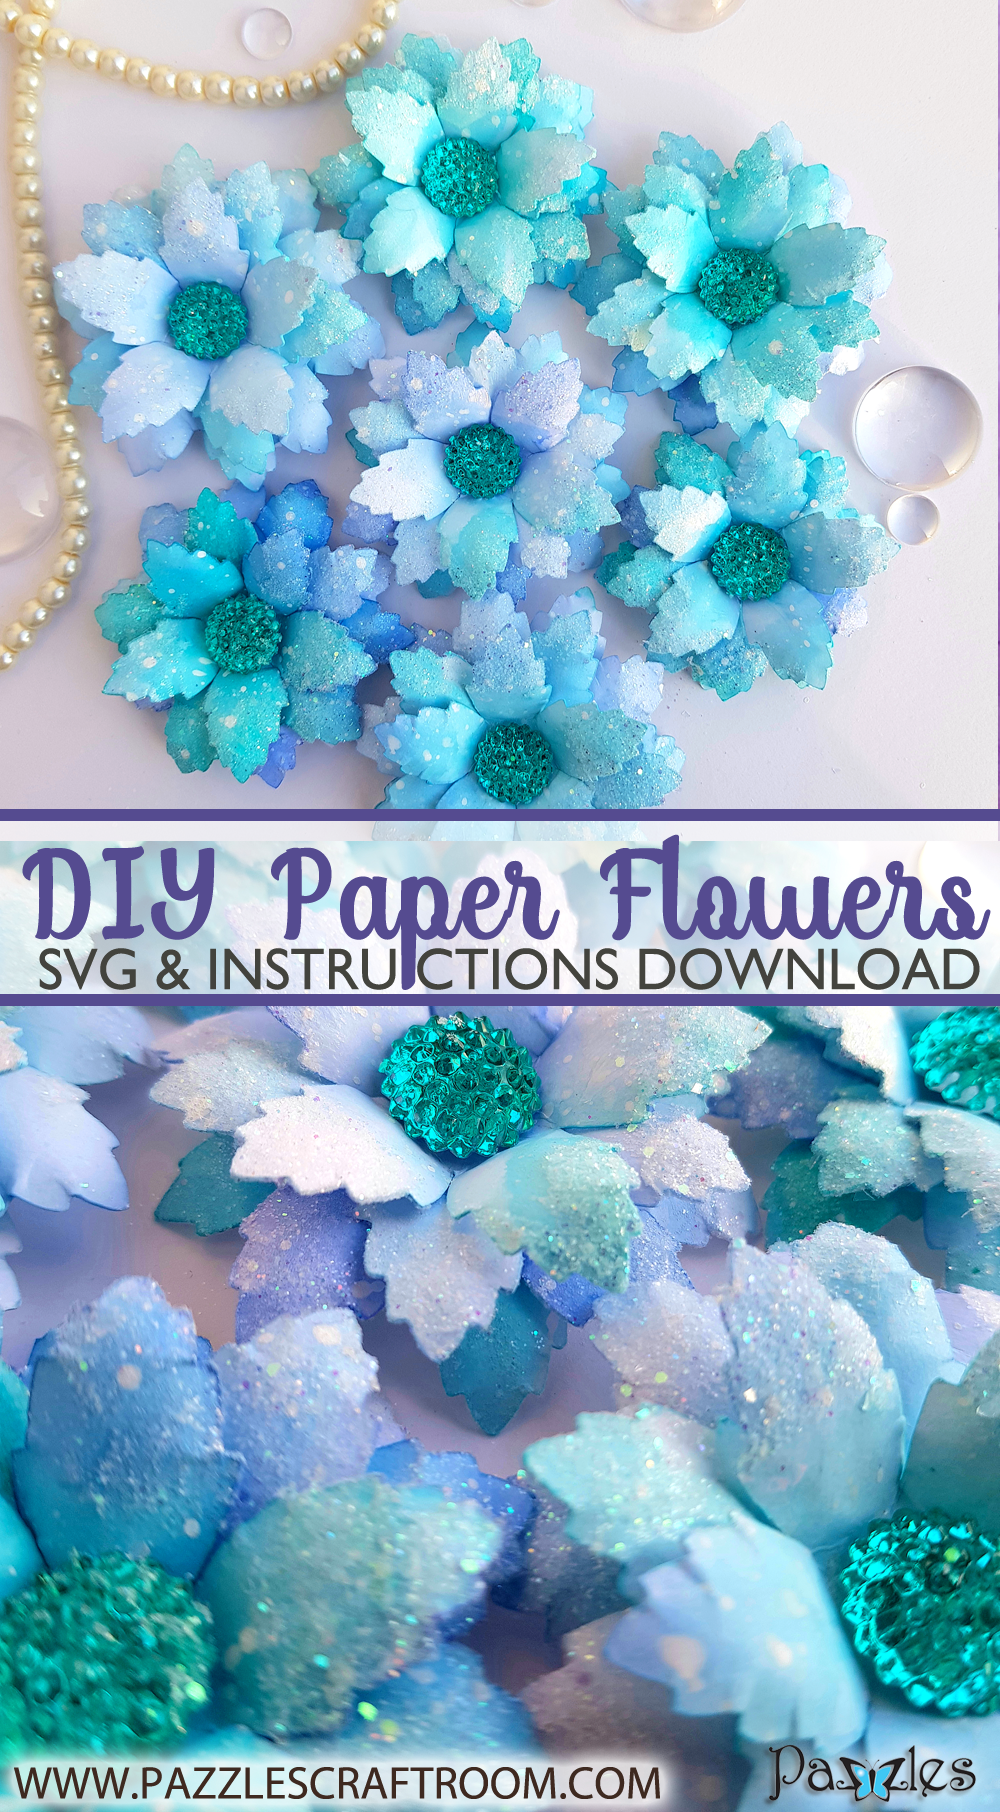 Pazzles Beautiful DIY Paper Flowers with SVG download compatible with all major electronic cutters including Pazzles Inspiration, Cricut, and Silhouette Cameo by Nida Tanweer